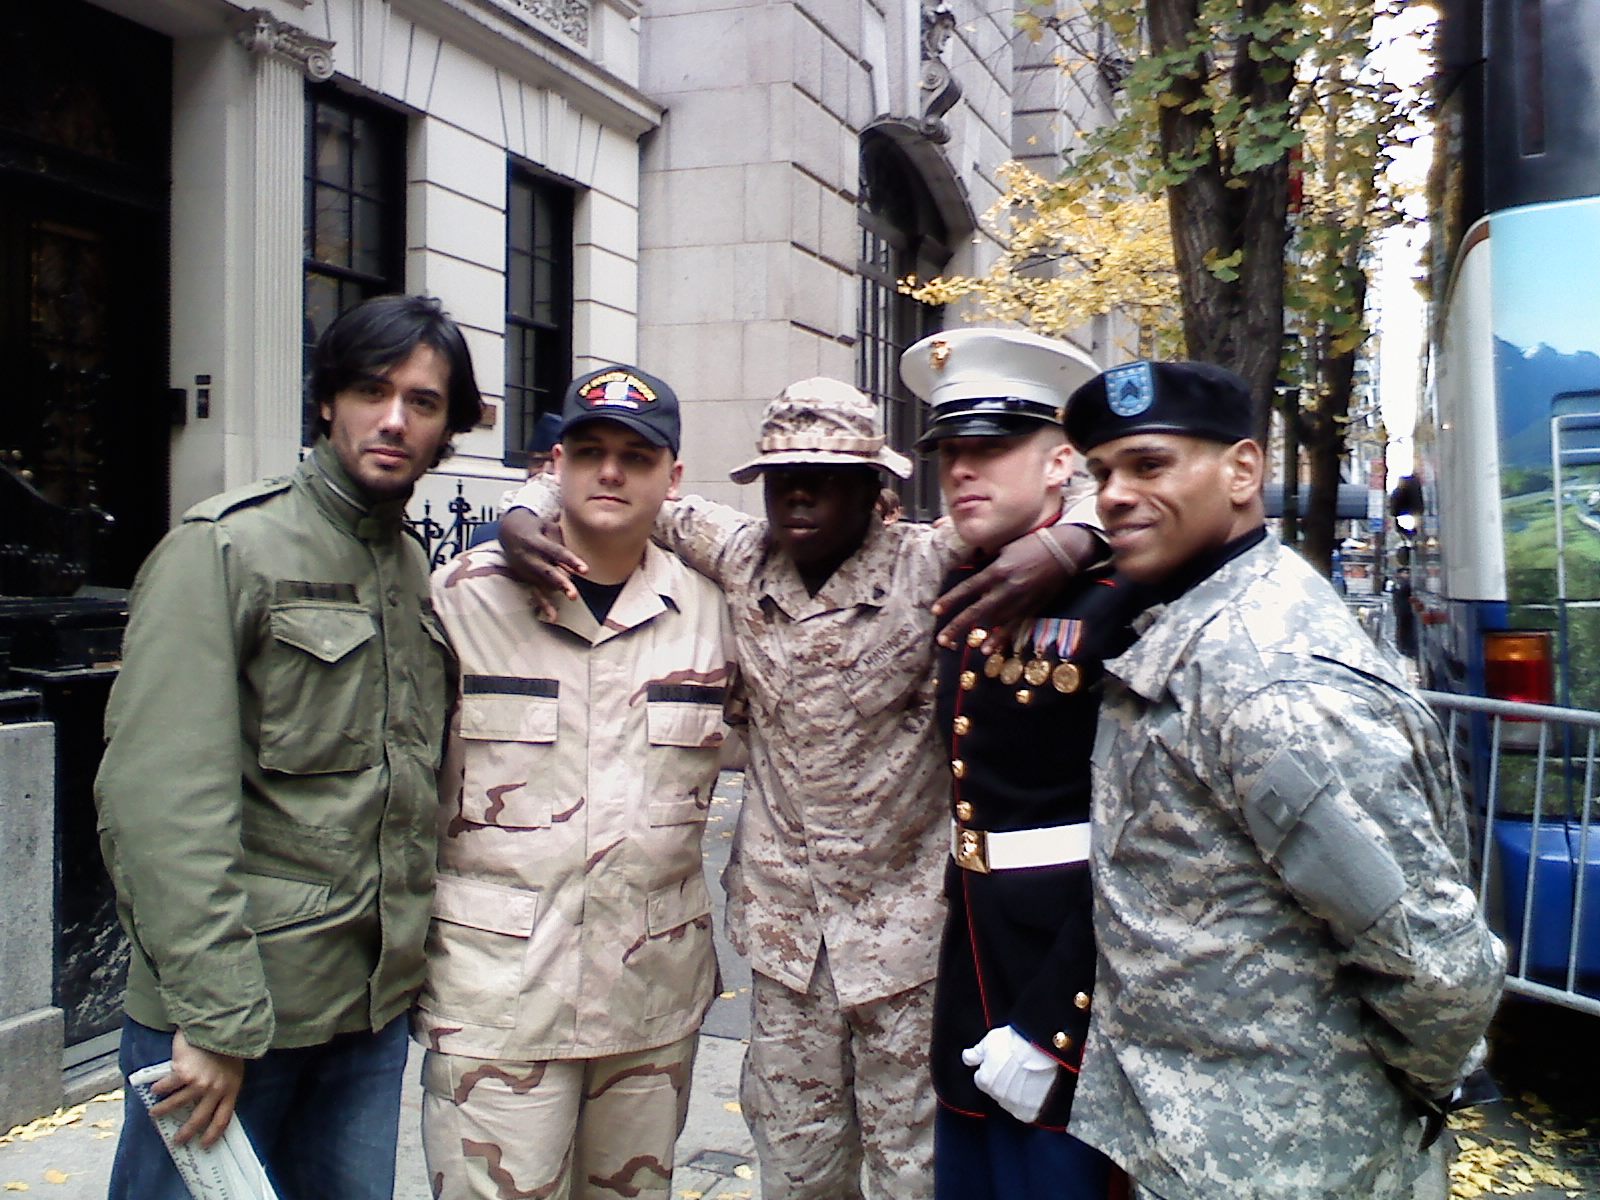 Daniel Kennedy, Corporal Derek Smith, Corporal Billy Russo and our brave armed forces march at the NYC Veterans Day Parade